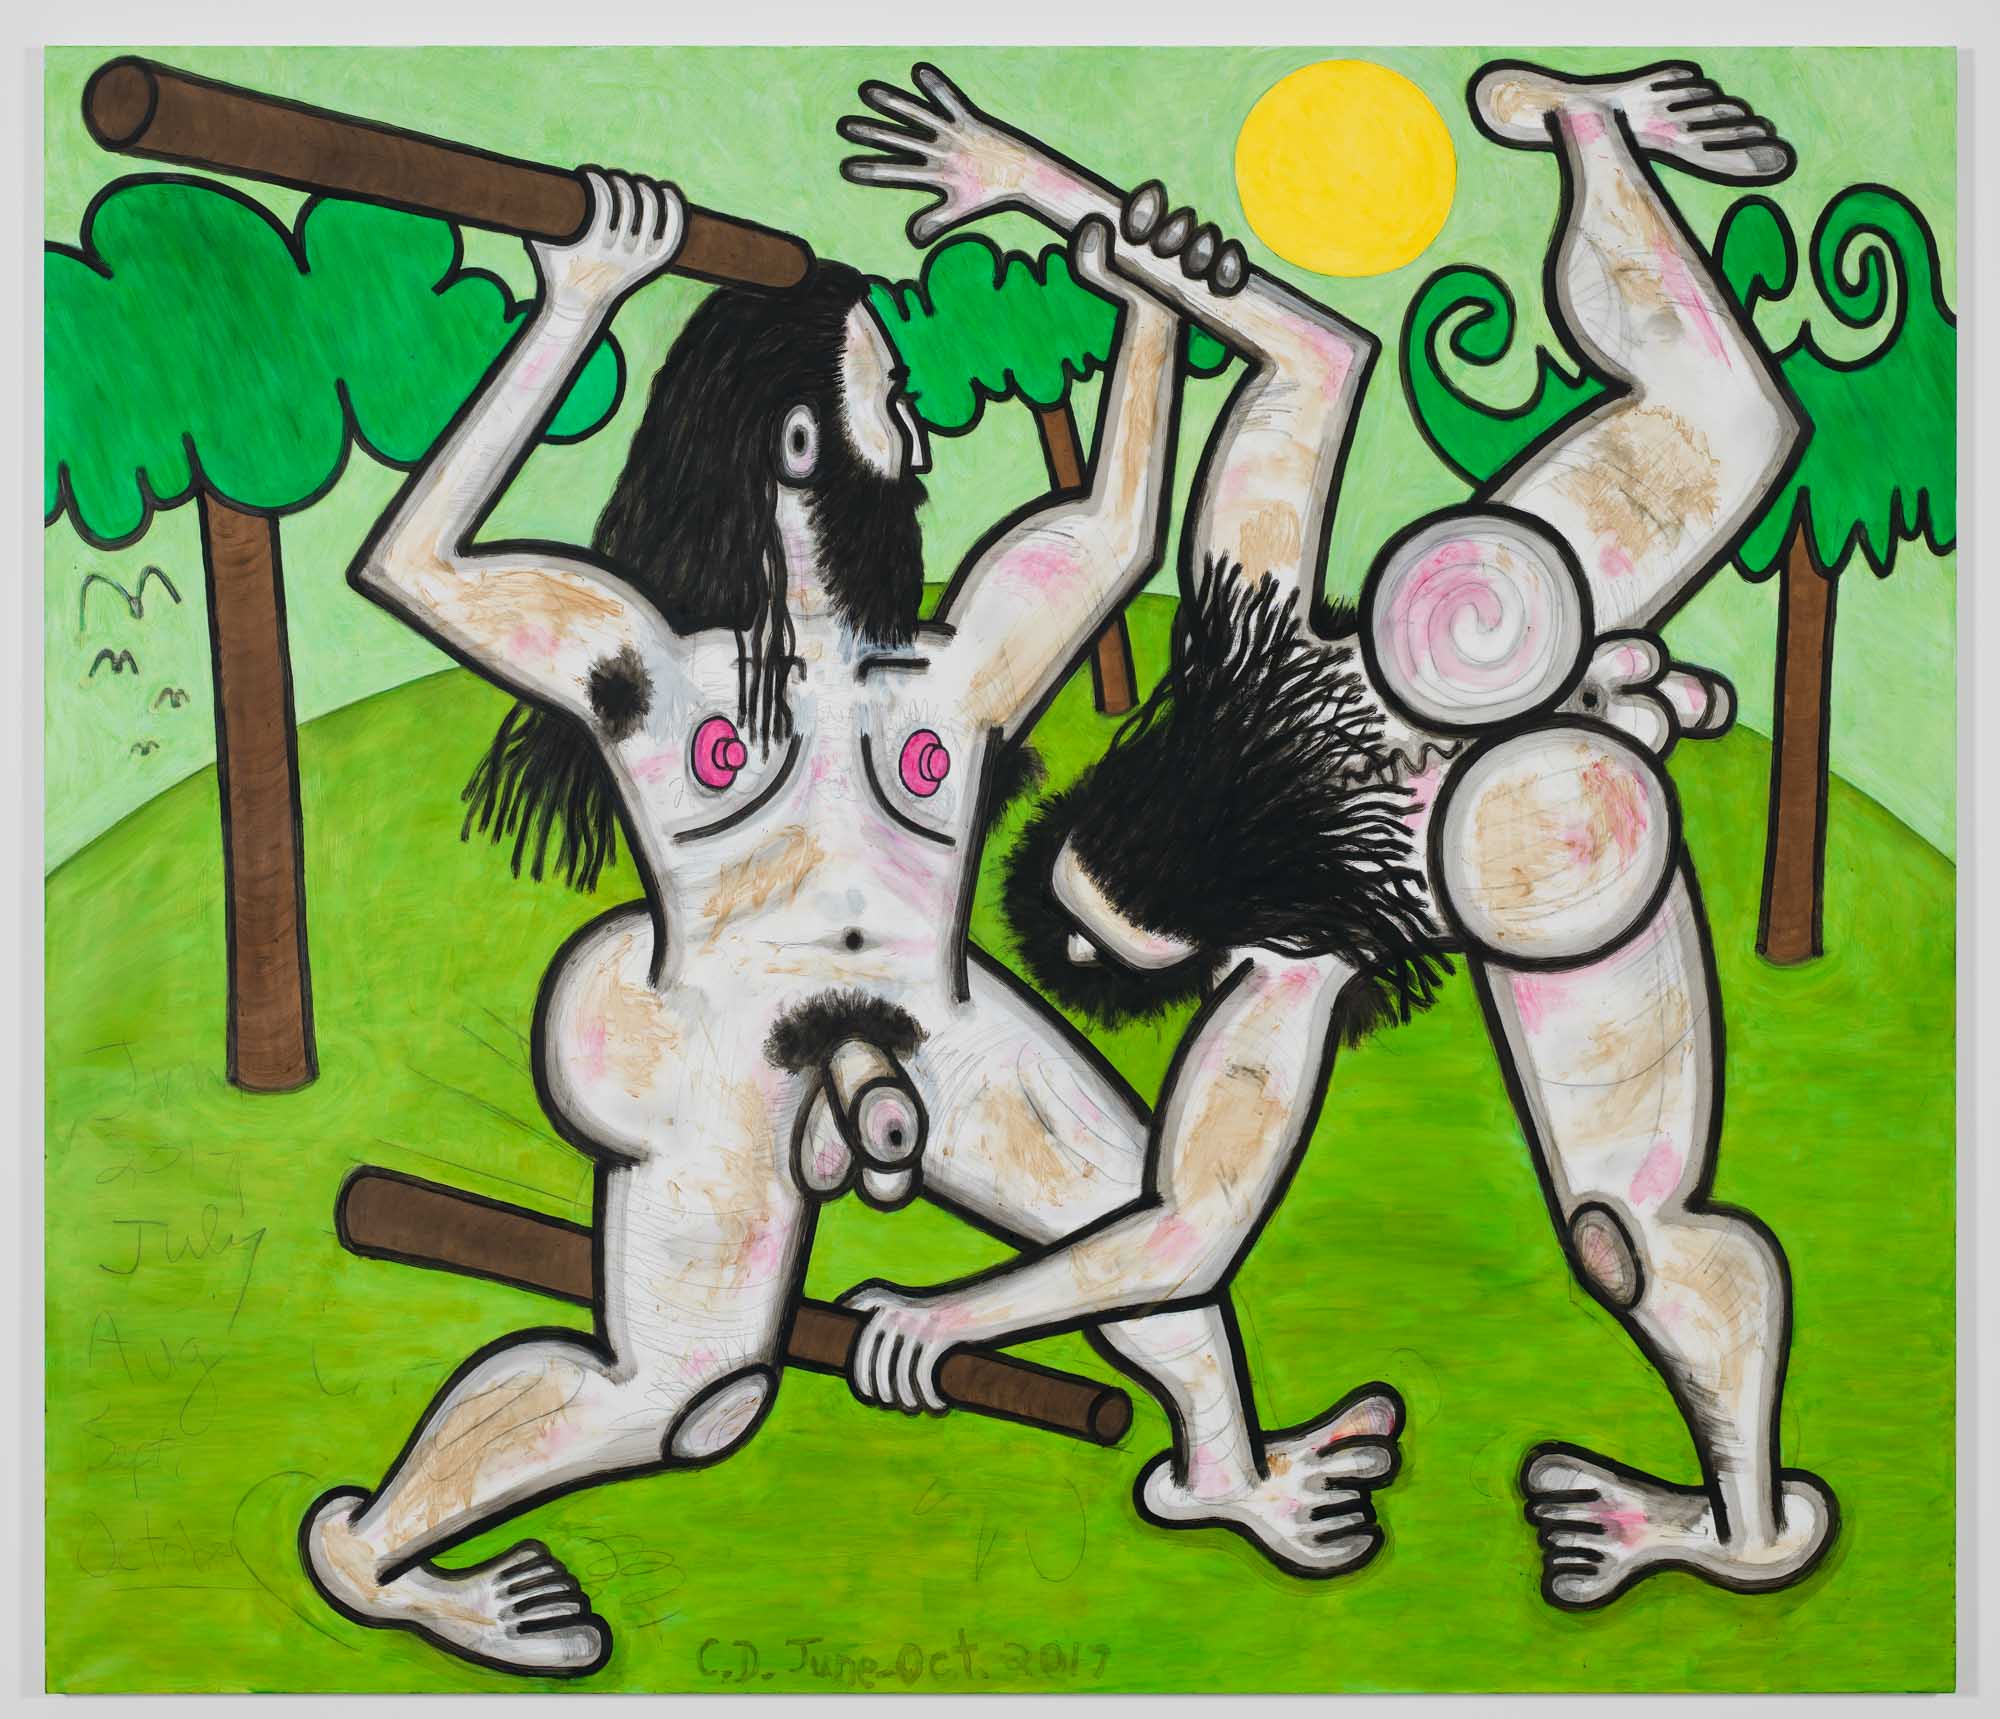 Carroll Dunham, Wrestlers. Â© Carroll Dunham. Courtesy the artist and Gladstone Gallery, New York and Brussels